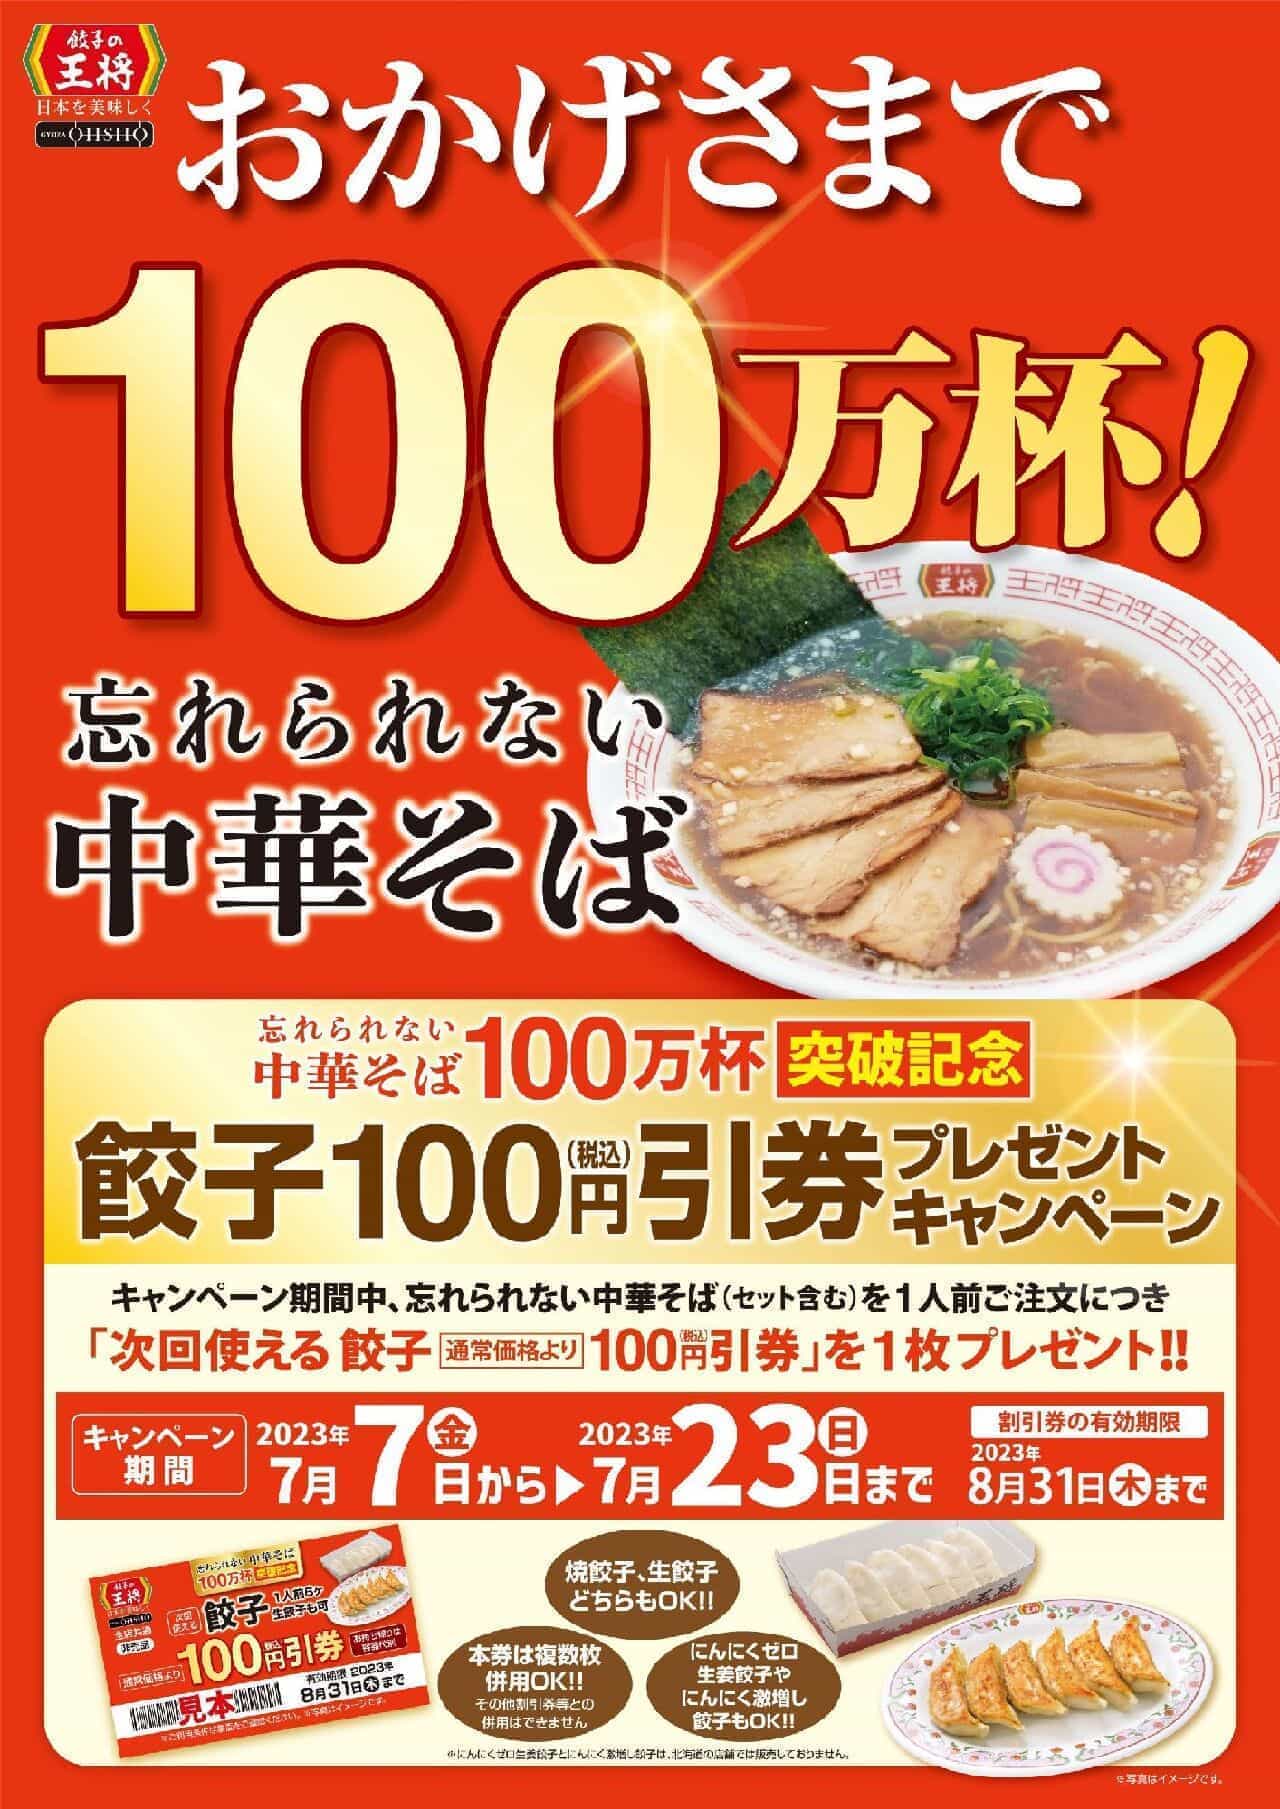 Gyoza no Ousho "Unforgettable Chinese Soba Noodles" Commemorative Campaign for over 1 million bowls.